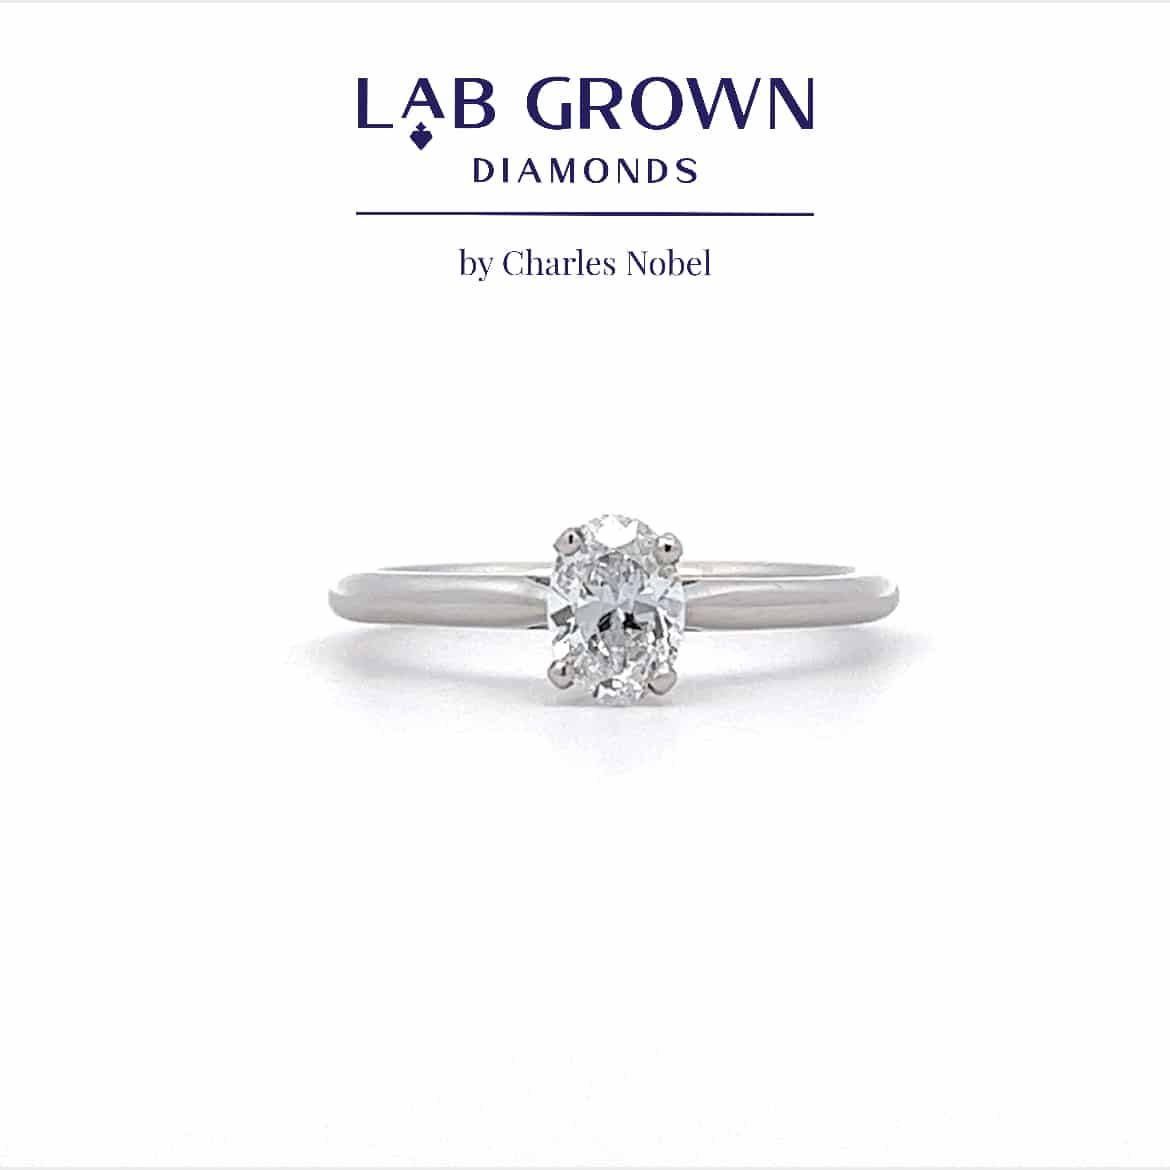 0.51ct, E colour, VS2 Clarity Lab Grown Oval Cut Diamond set in a 4 Claw Platinum Mount